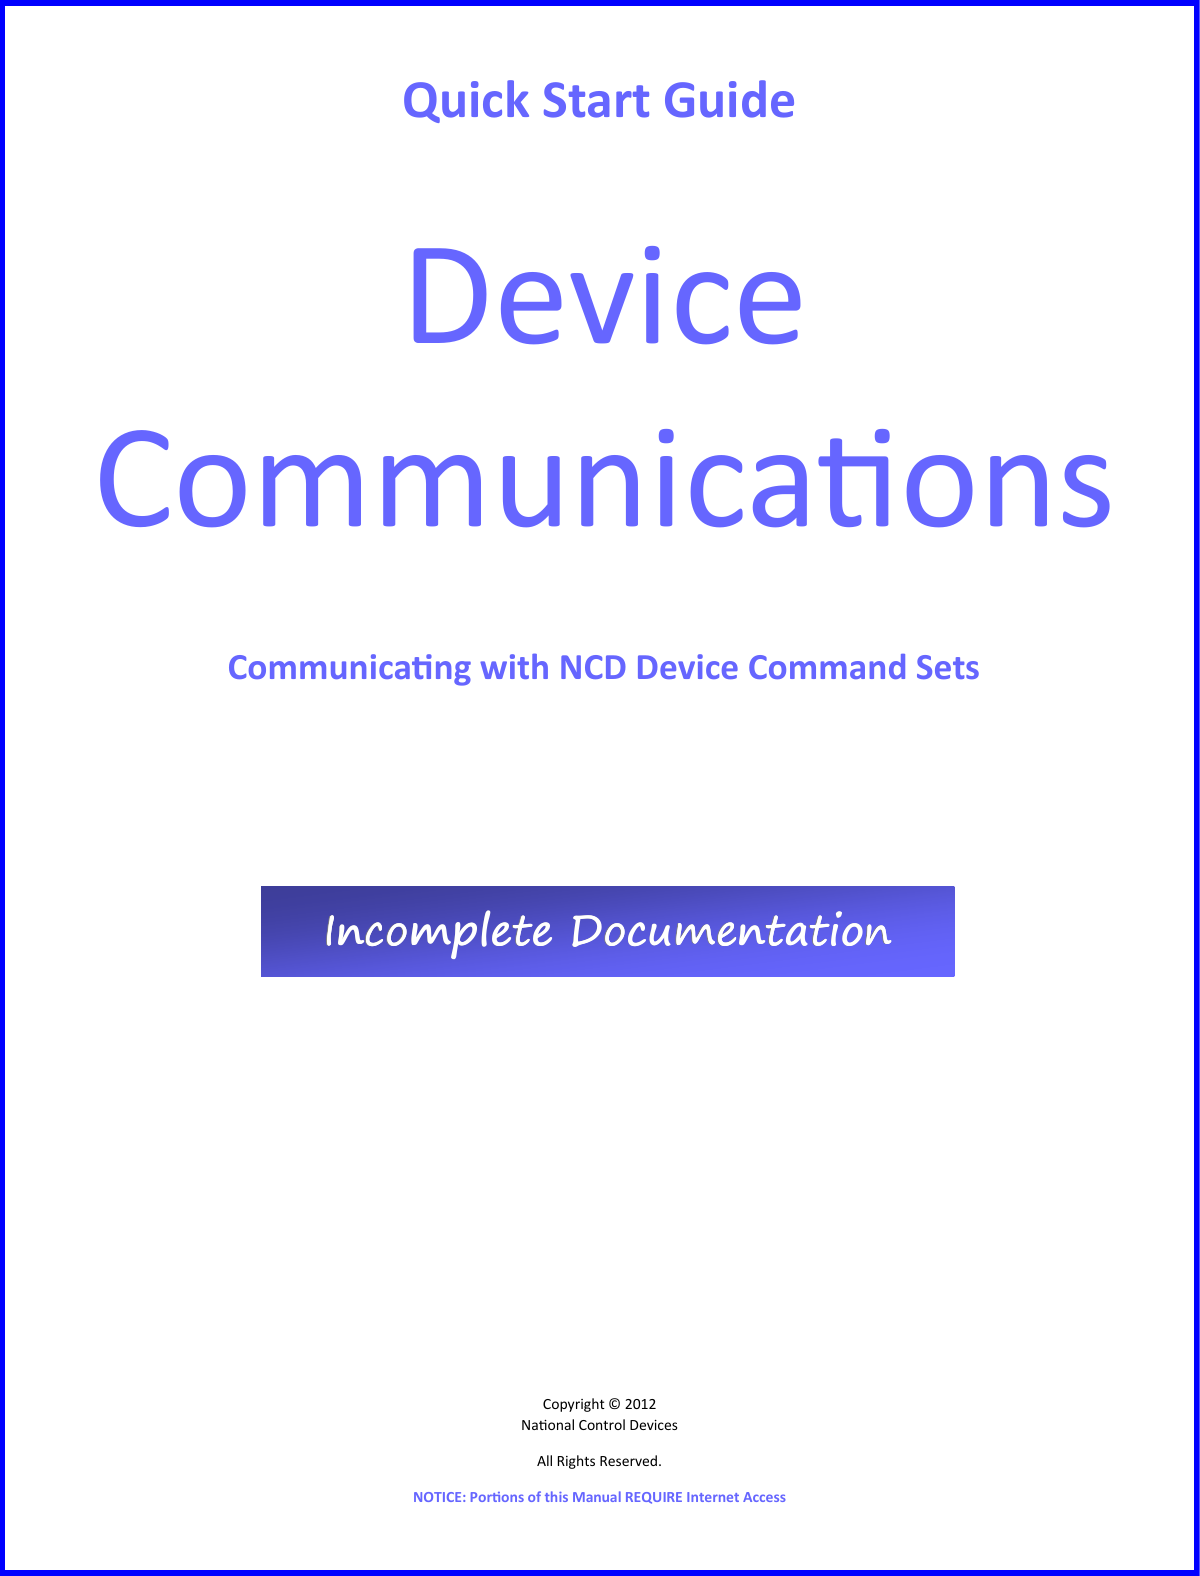 Page 1 of 2 - NCD Device Communications  Quick Start Guide